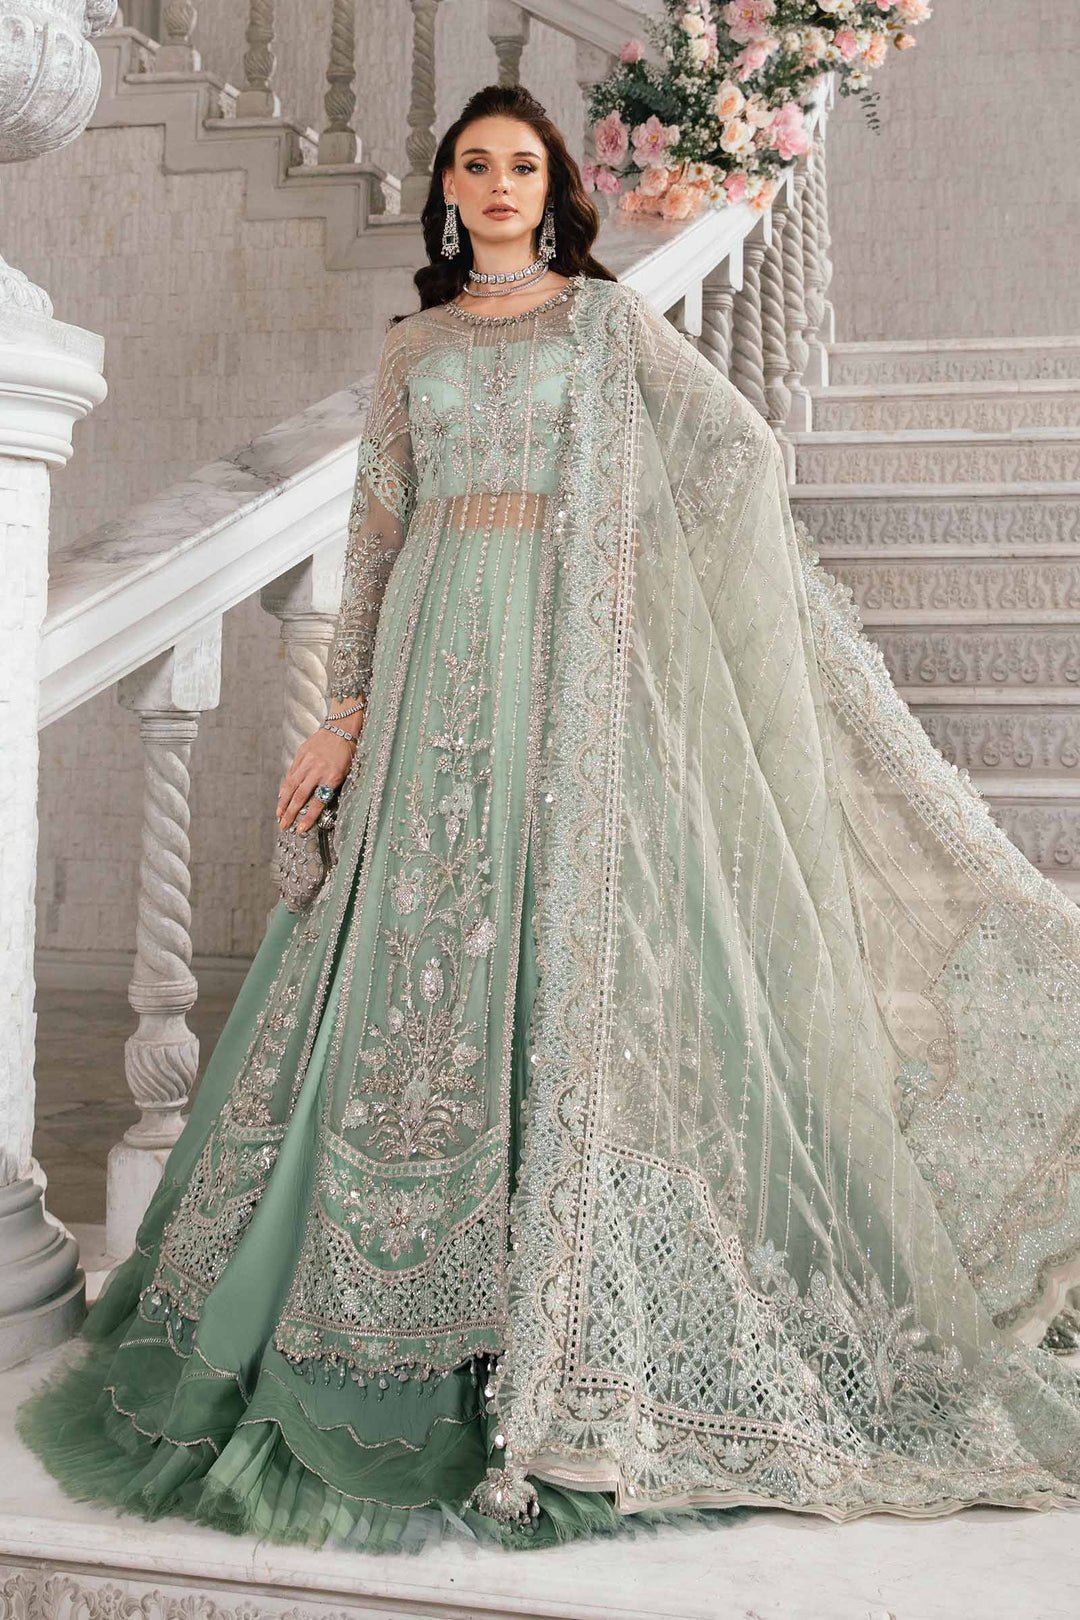 3 PIECE UNSTITCHED EMBROIDERED SUIT | BD - 2803 - STYLISTICOUTURE